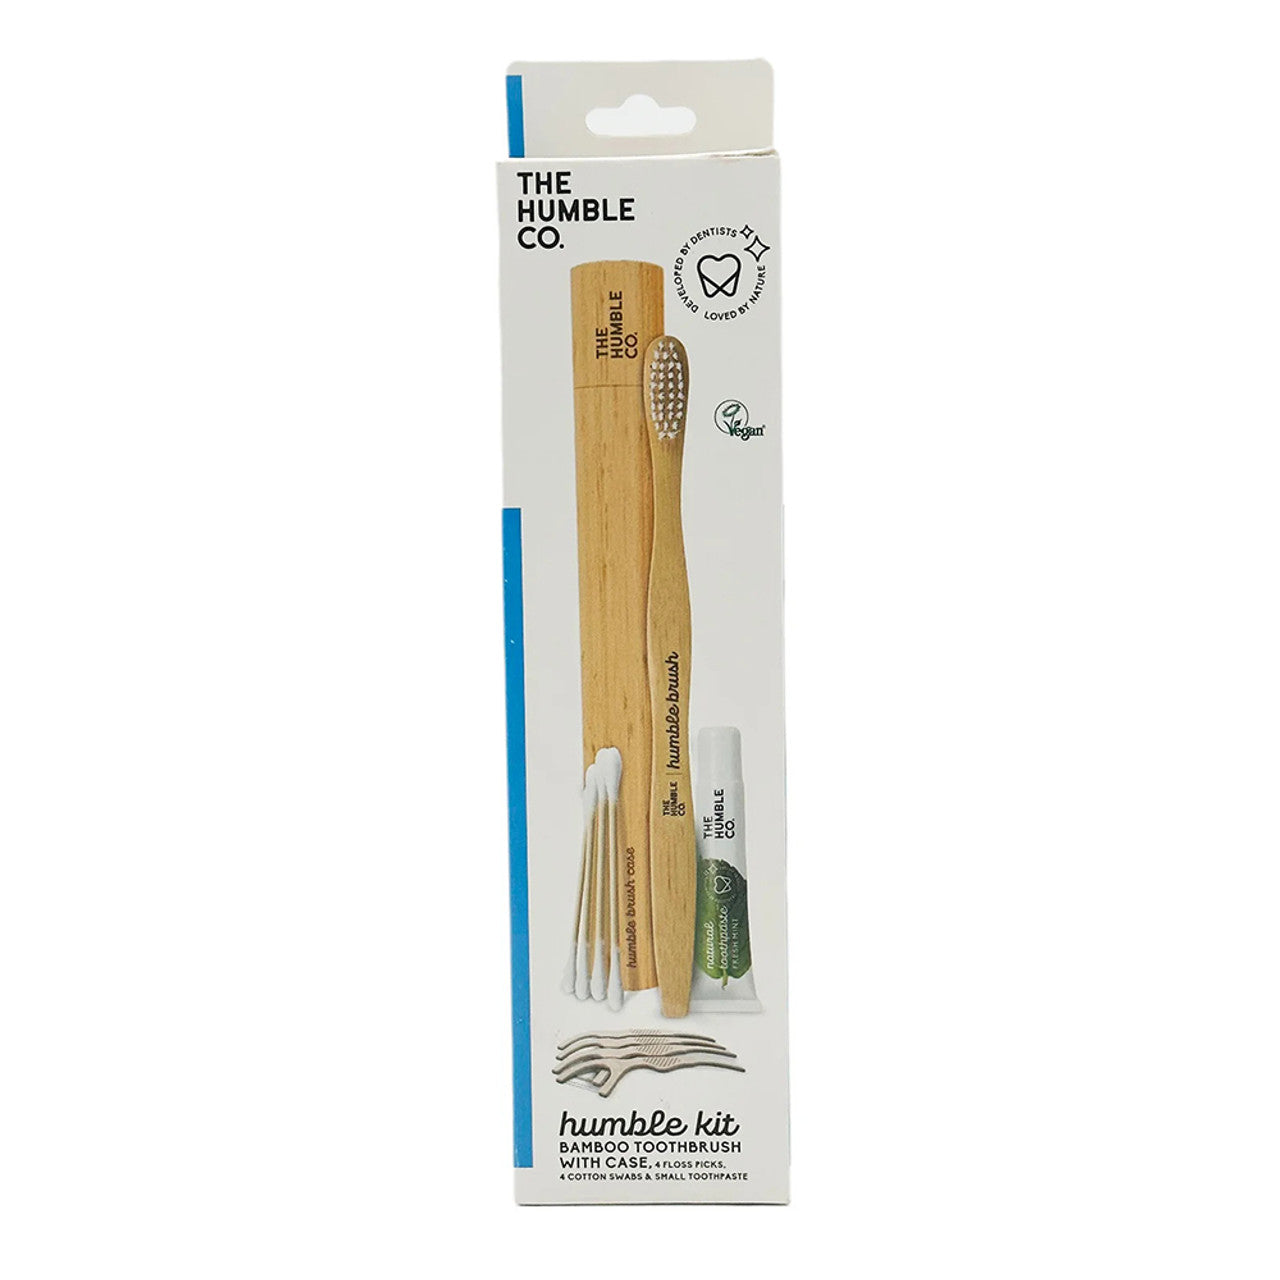 The Humble Co Travel Kit, Bamboo Toothbrush With Case, Floss, Cotton Swab and Toothpaste, 11 Ea